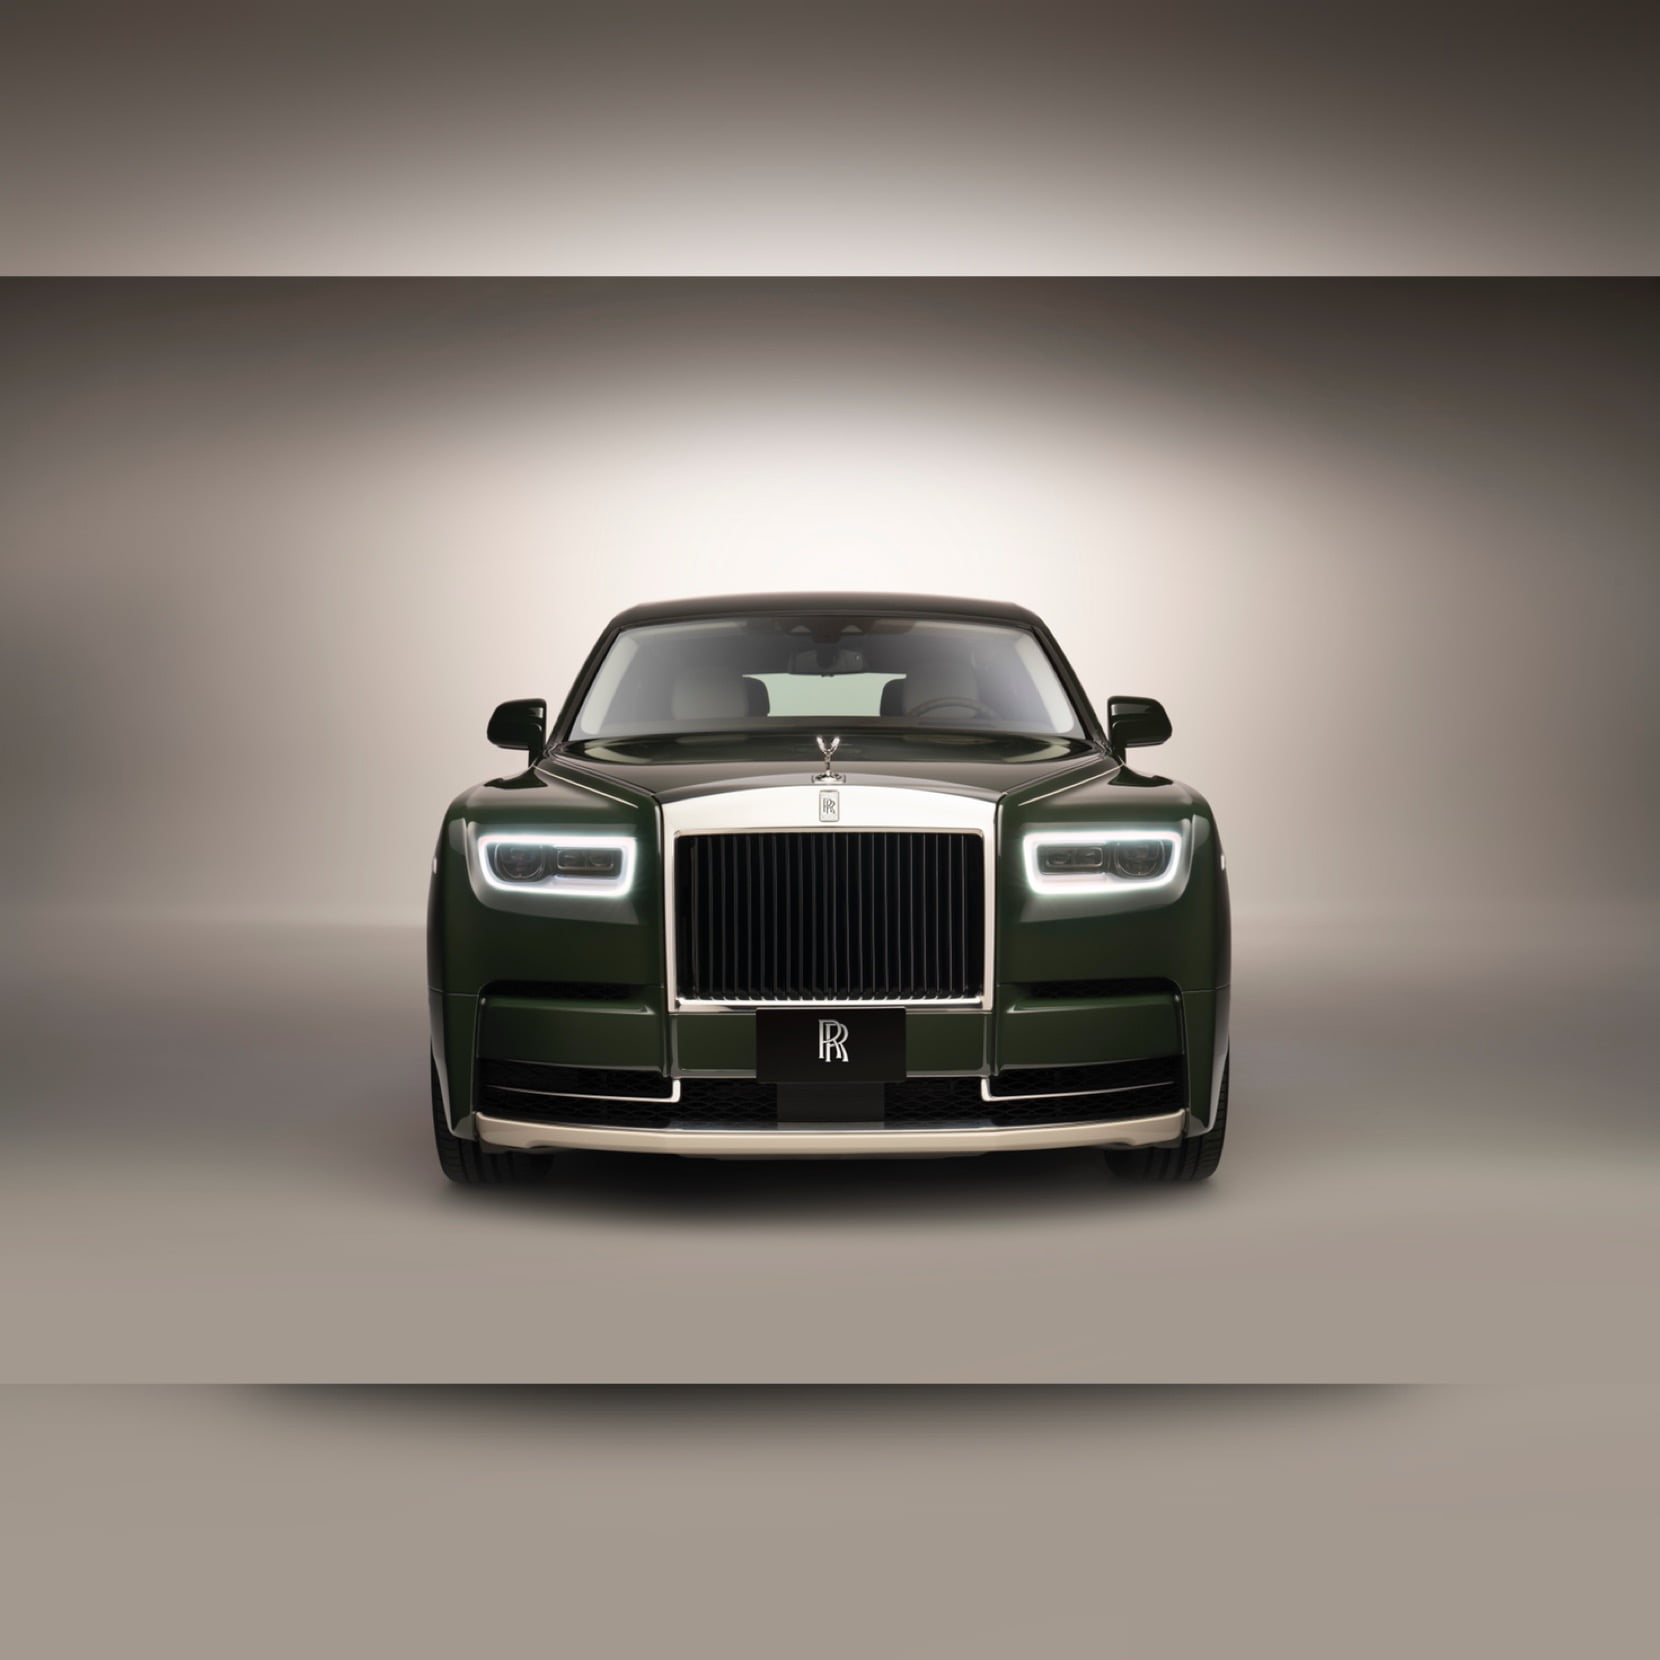 Rolls-Royce Phantom Oribe in collaboration with Hermes image for use by 360 Magazine